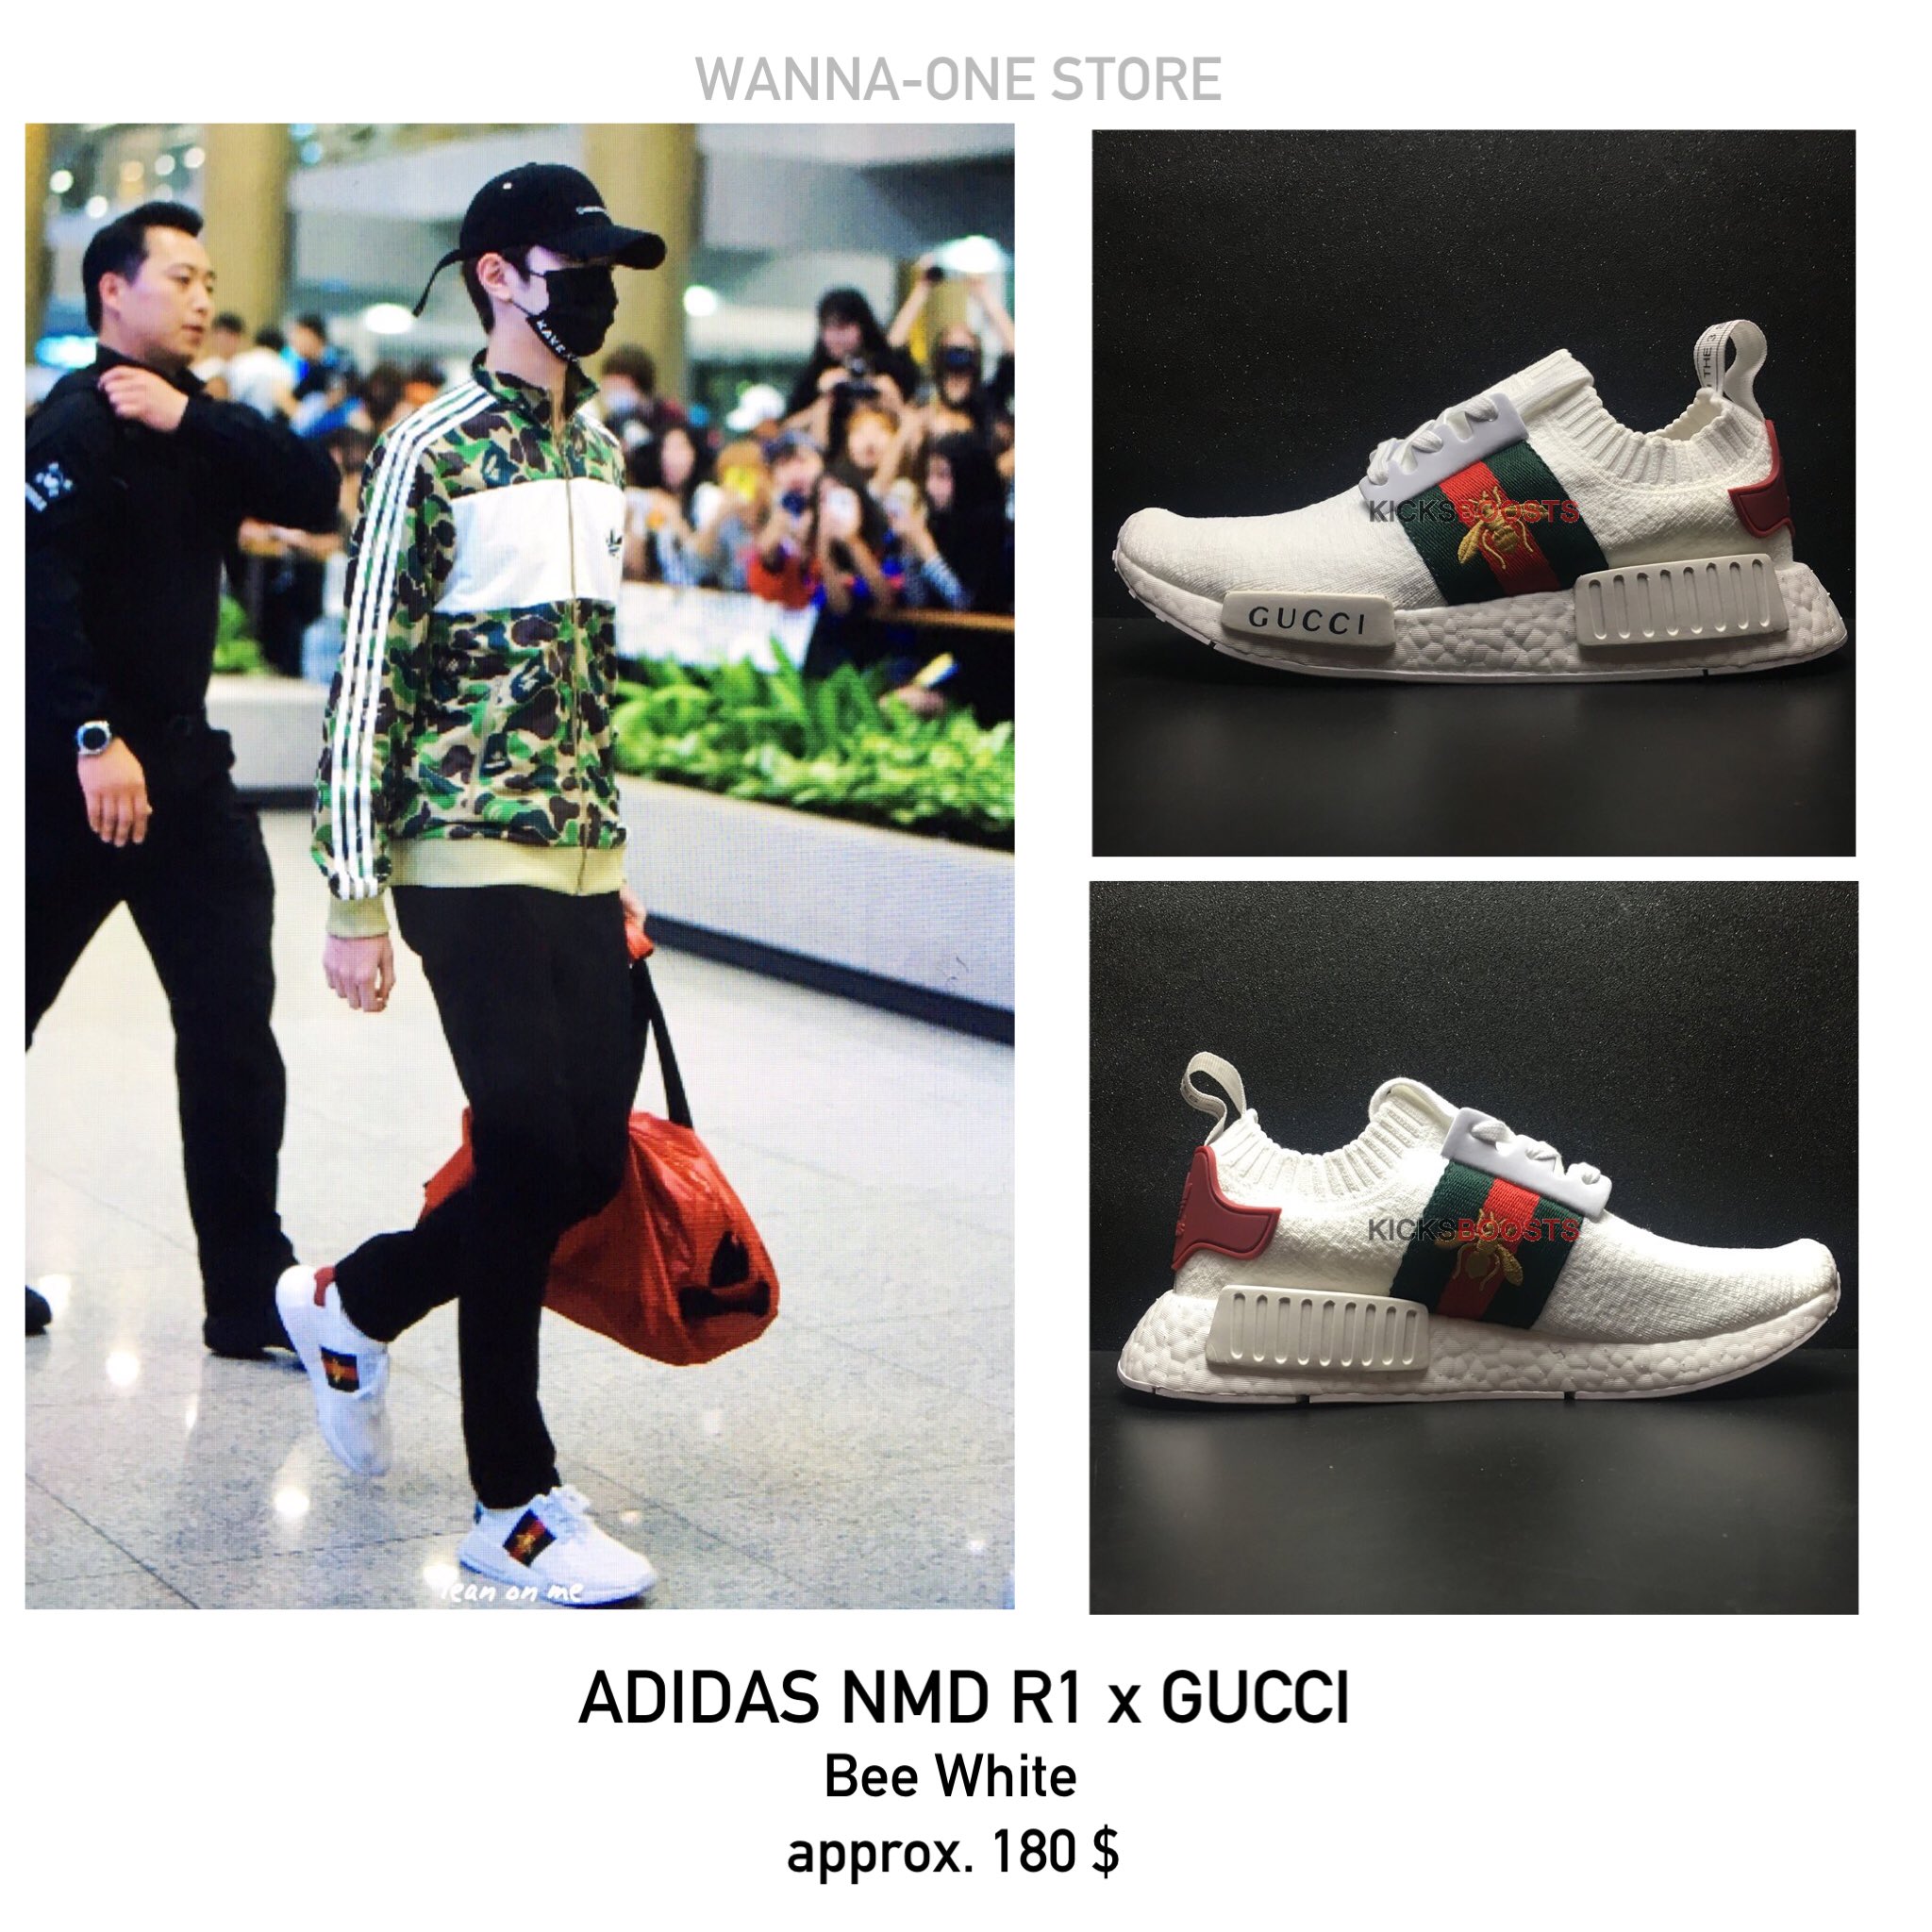 WANNA-ONE STORE on Twitter: "ADIDAS NMD R1 GUCCI Bee White approx. 180 $ Credit pic : @ leanonme923 #라이관린 #워너원 #LaiKuanlin #WannaOne https://t.co/jOJ0VfLvz0" / Twitter